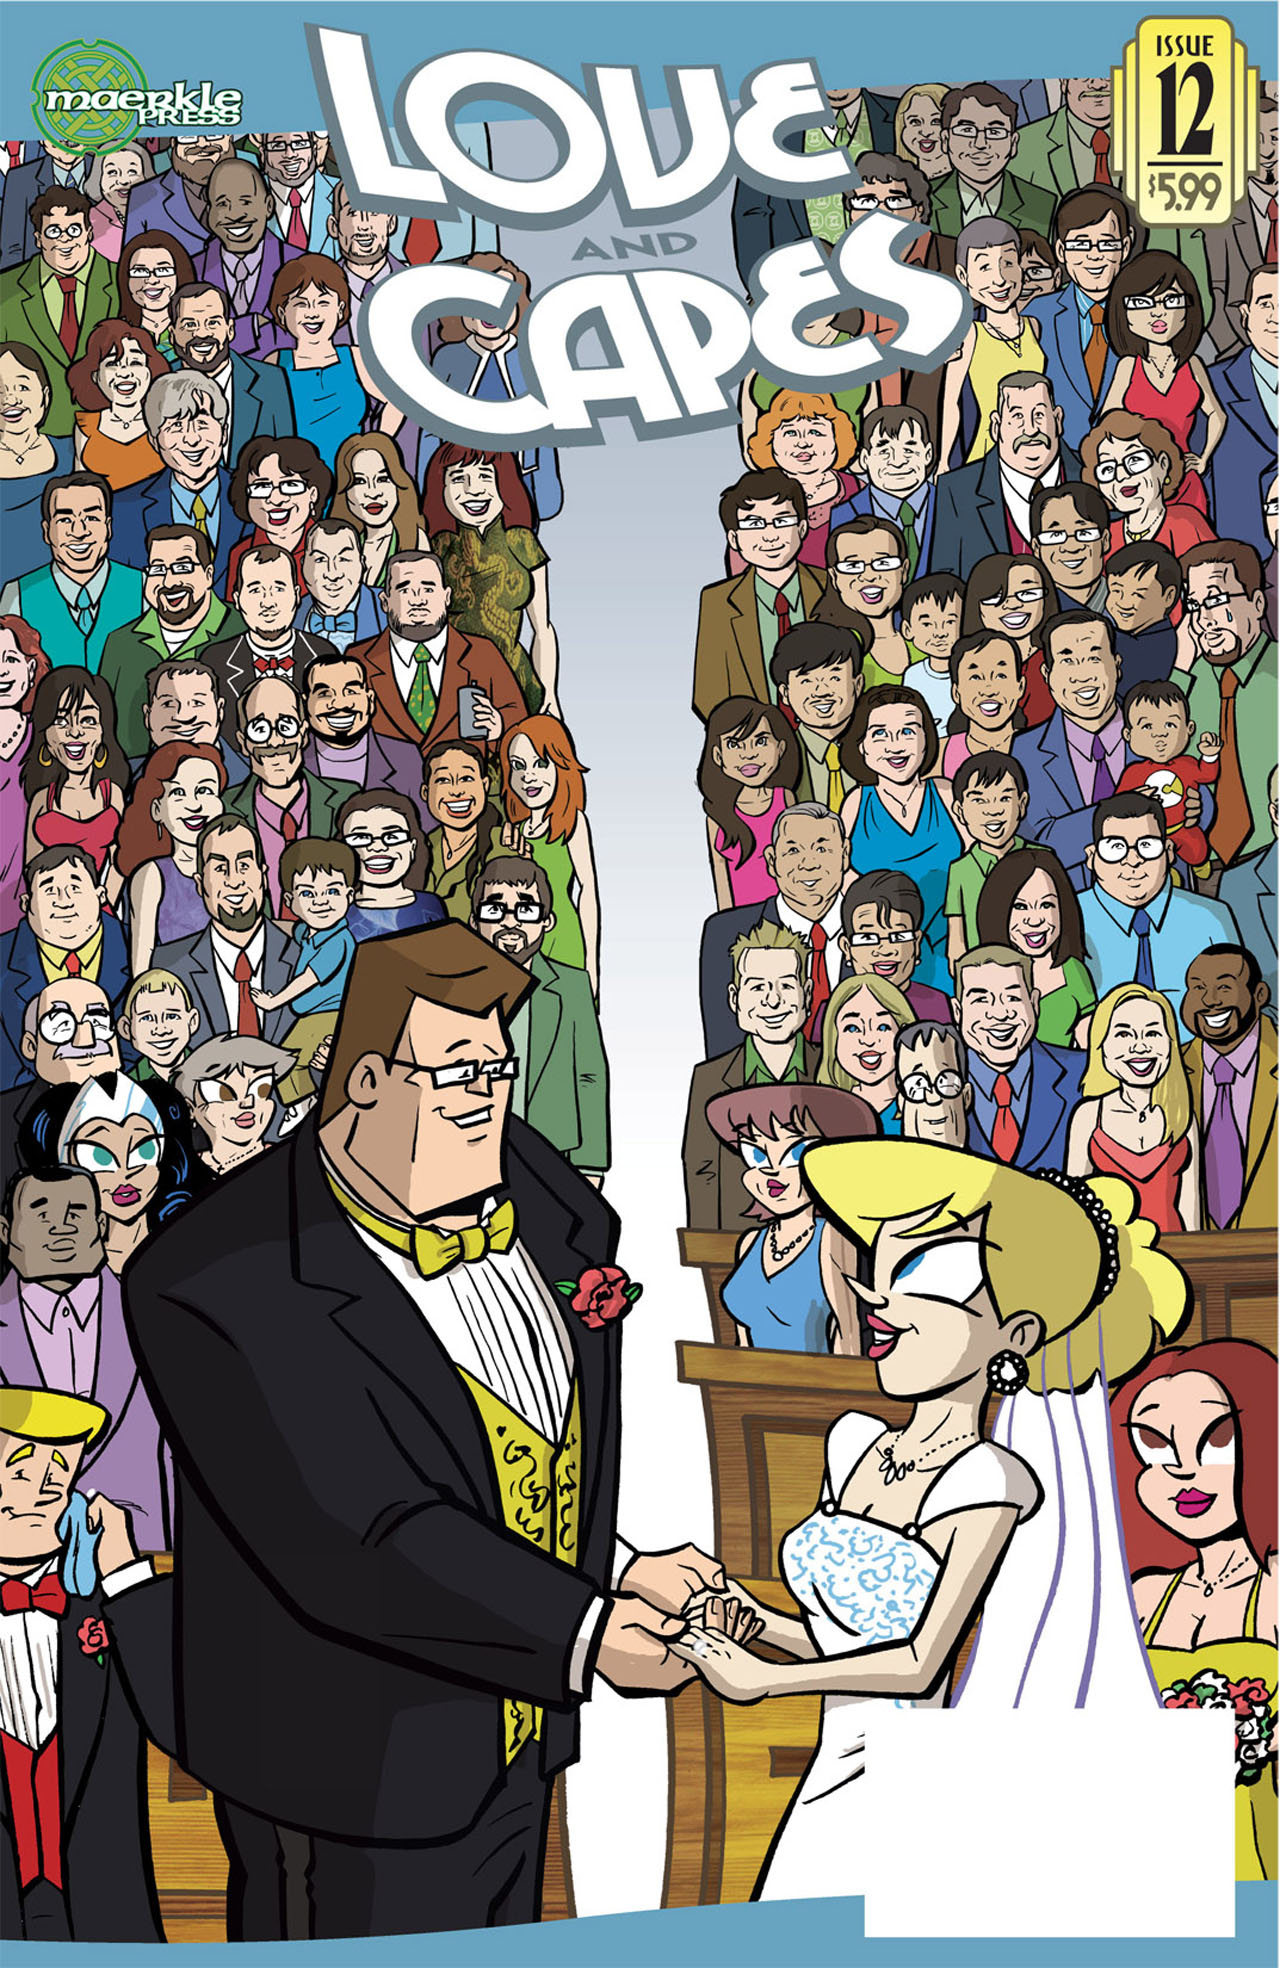 Read online Love and Capes comic -  Issue #12 - 2